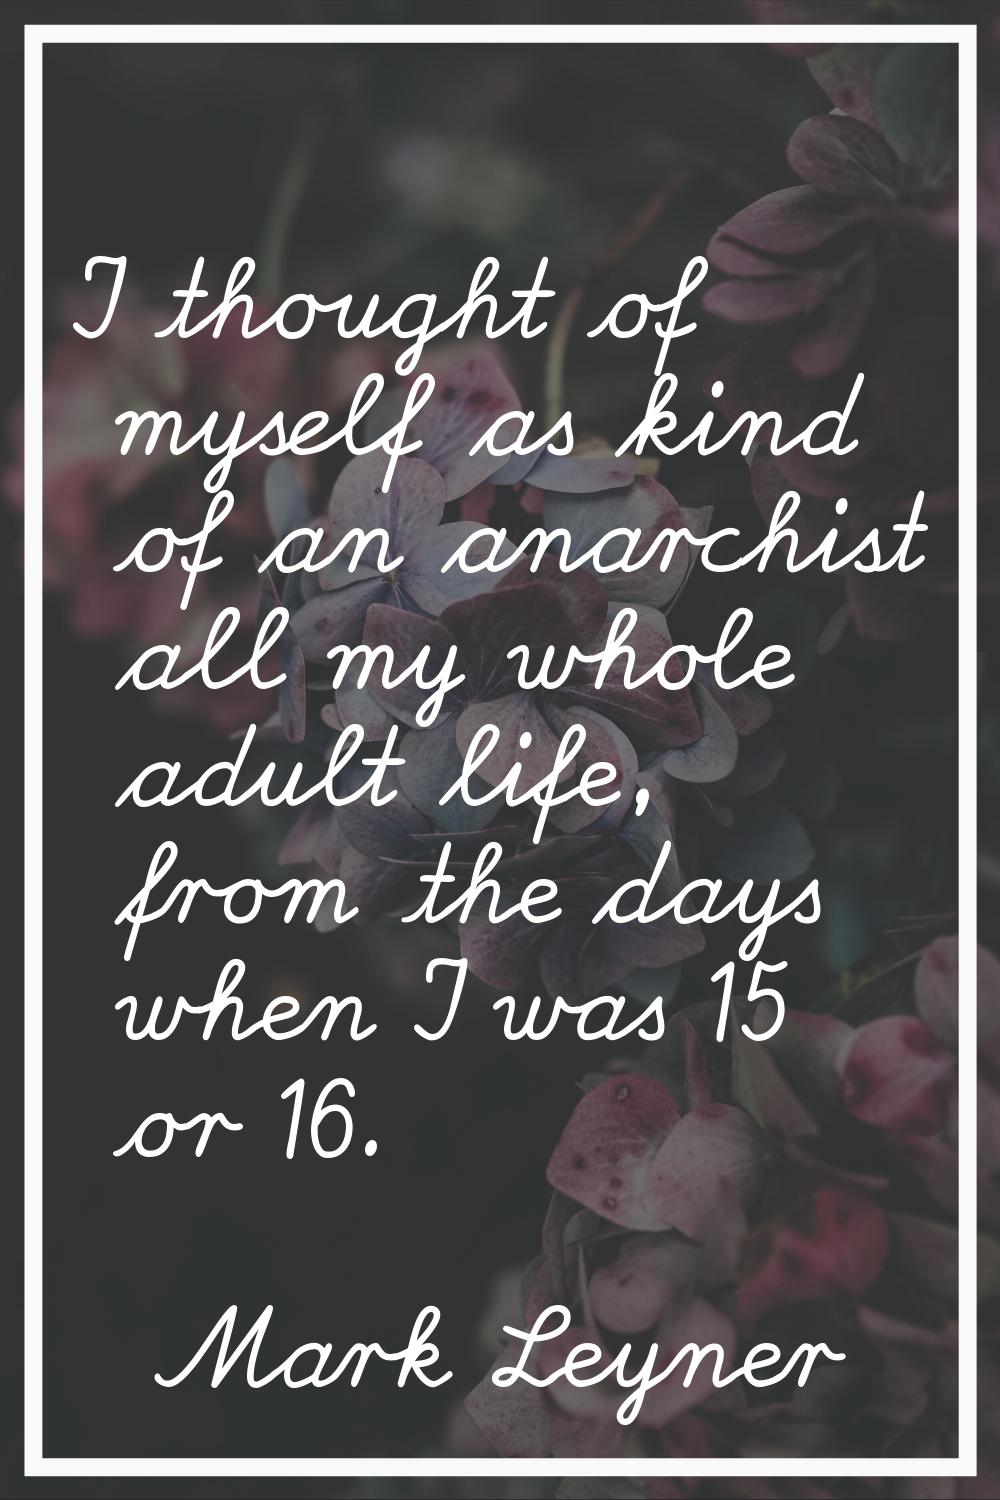 I thought of myself as kind of an anarchist all my whole adult life, from the days when I was 15 or